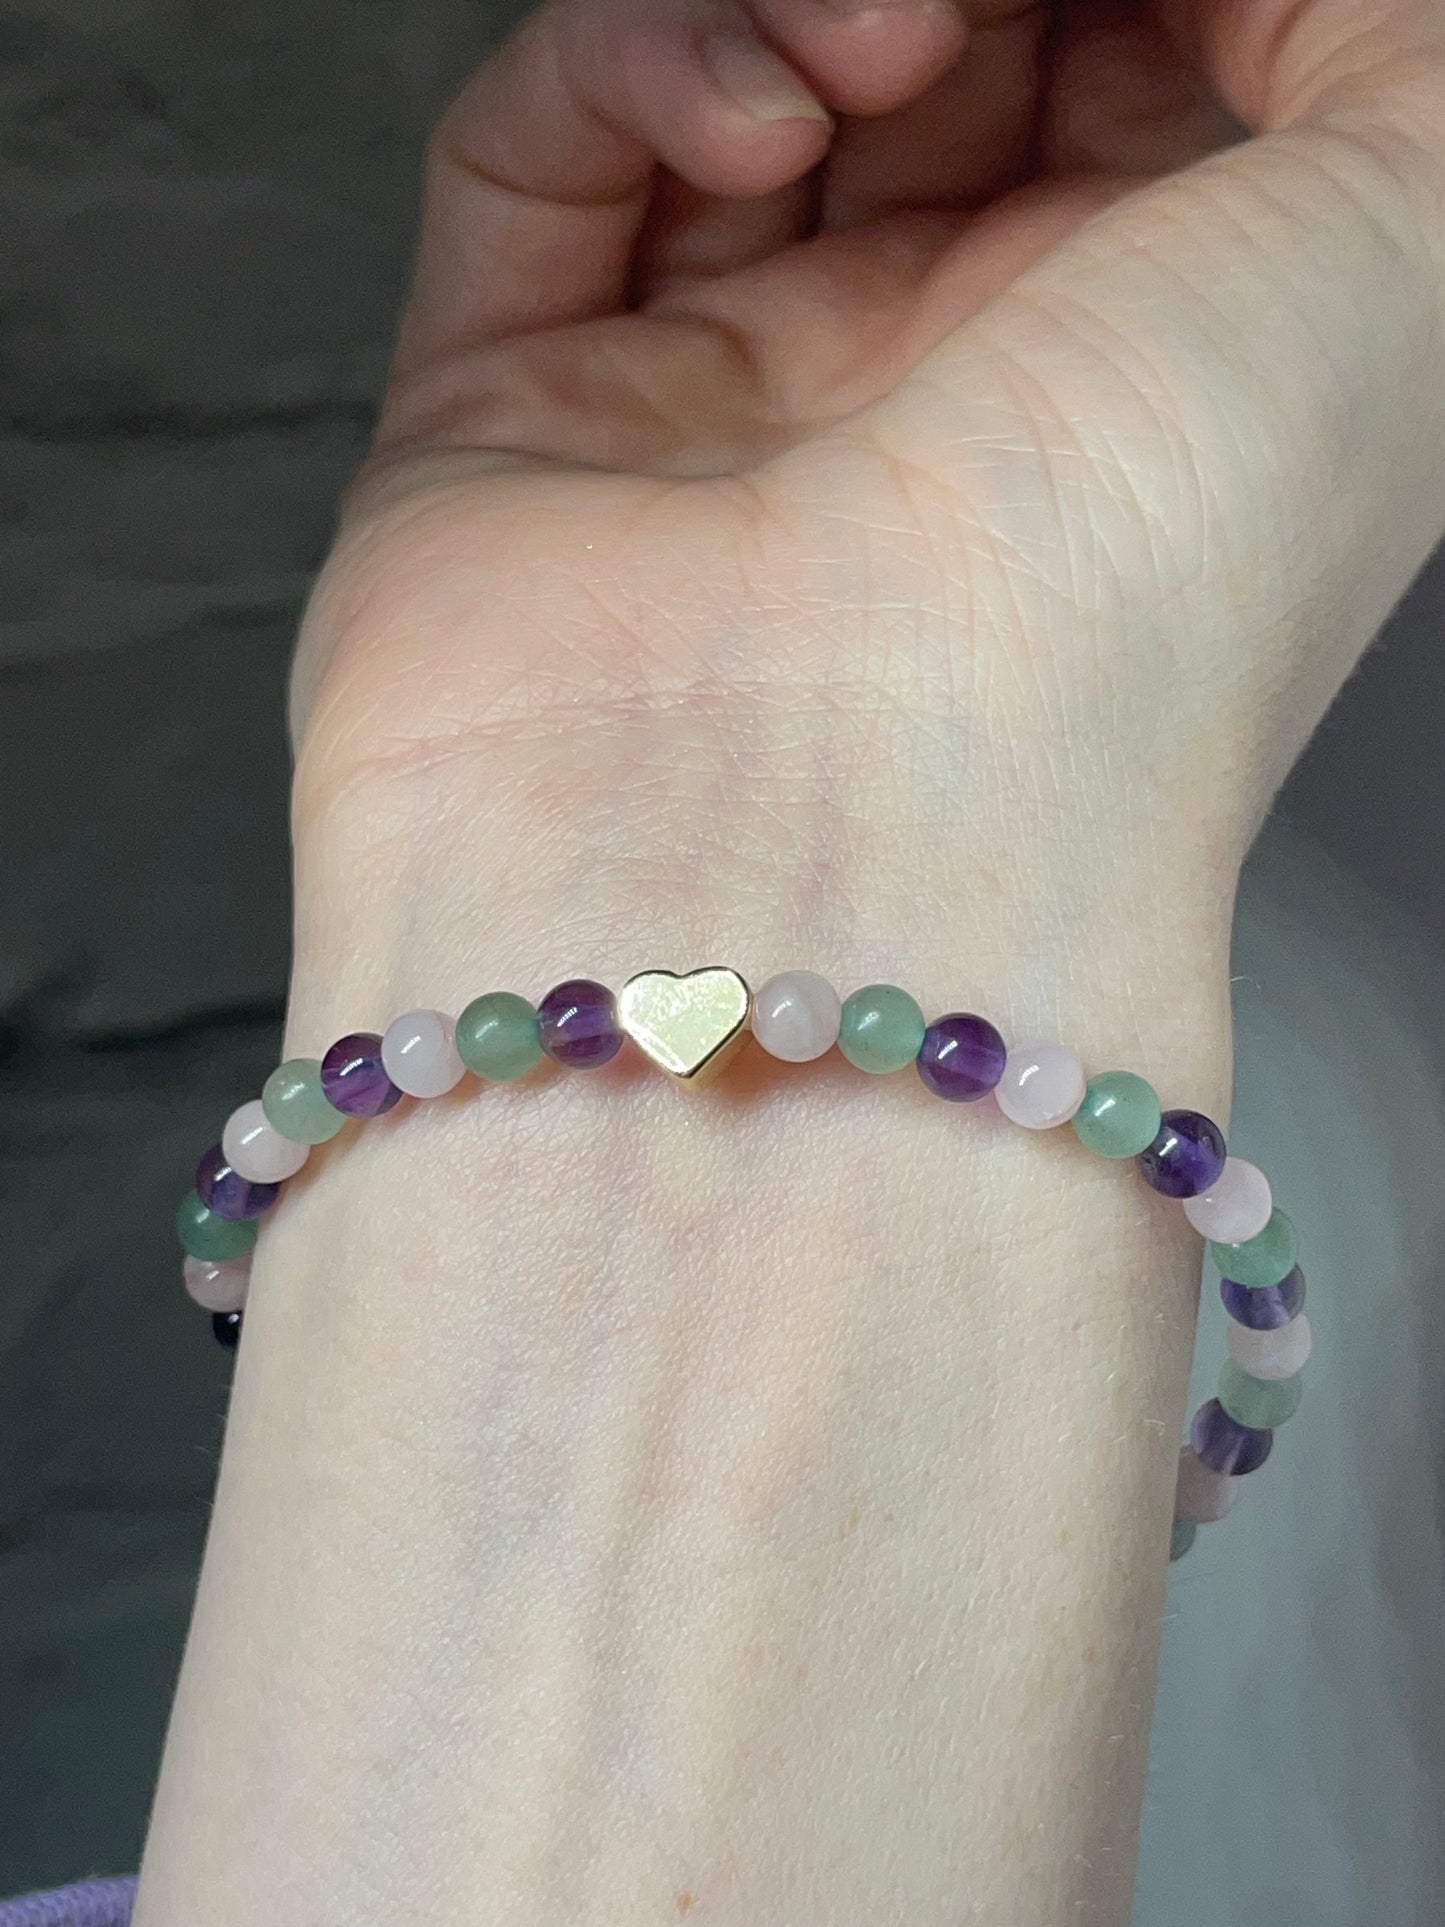 Anxiety/ self love crystal healing bracelet and anklet